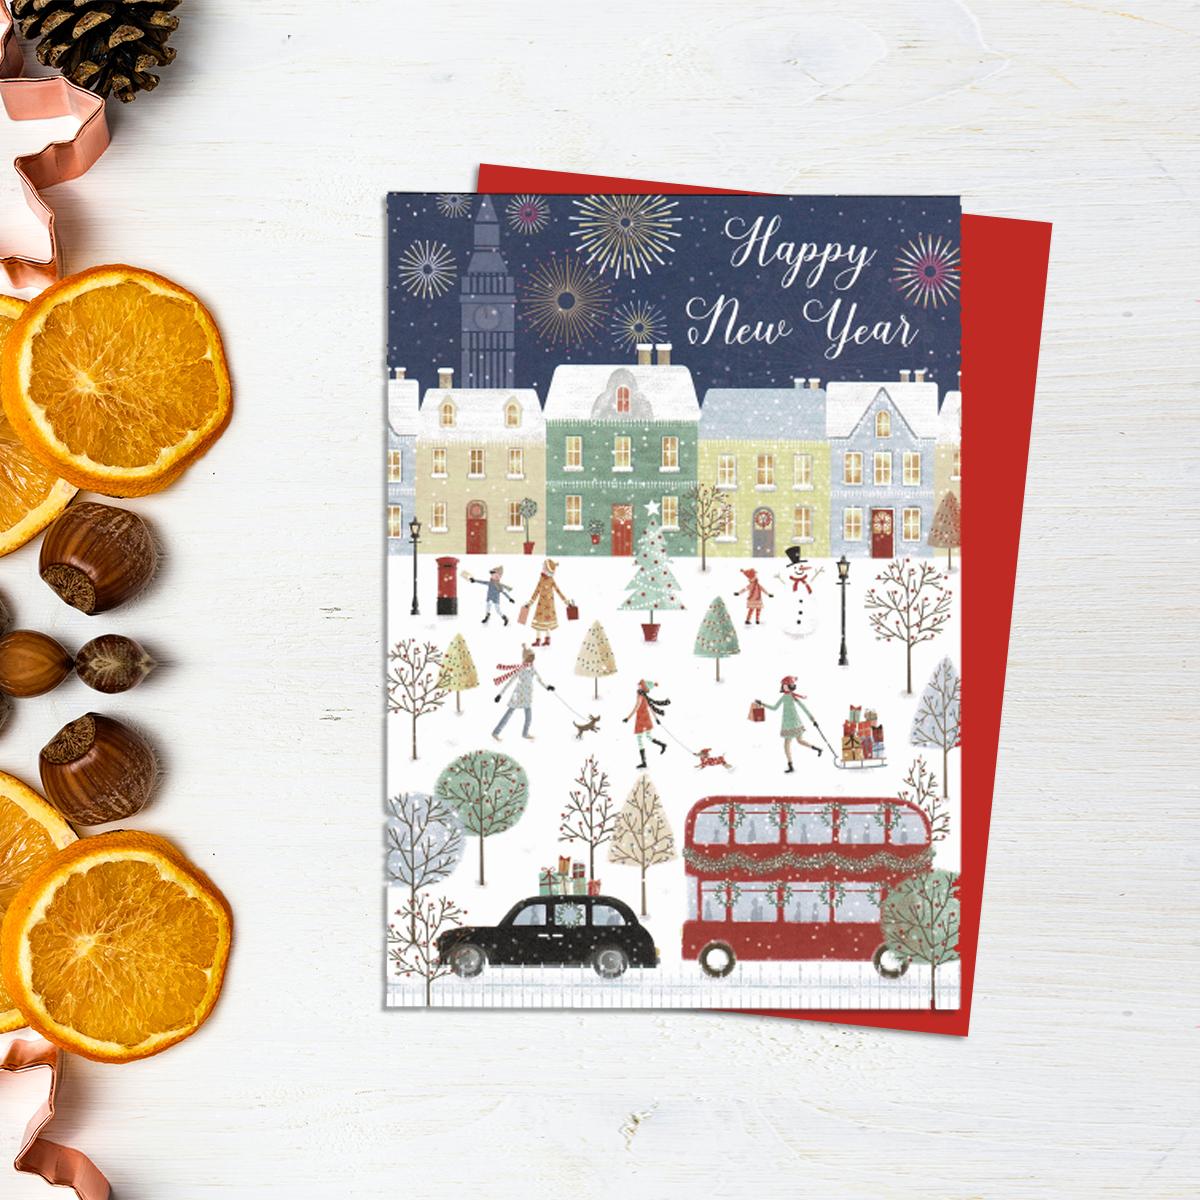 Happy New Year Card Showing A Cityscape With A Red Bus And Black Taxi With People Walking Dogs In The Snow. Full Colour Inside And Out Finishes This Lovely Card